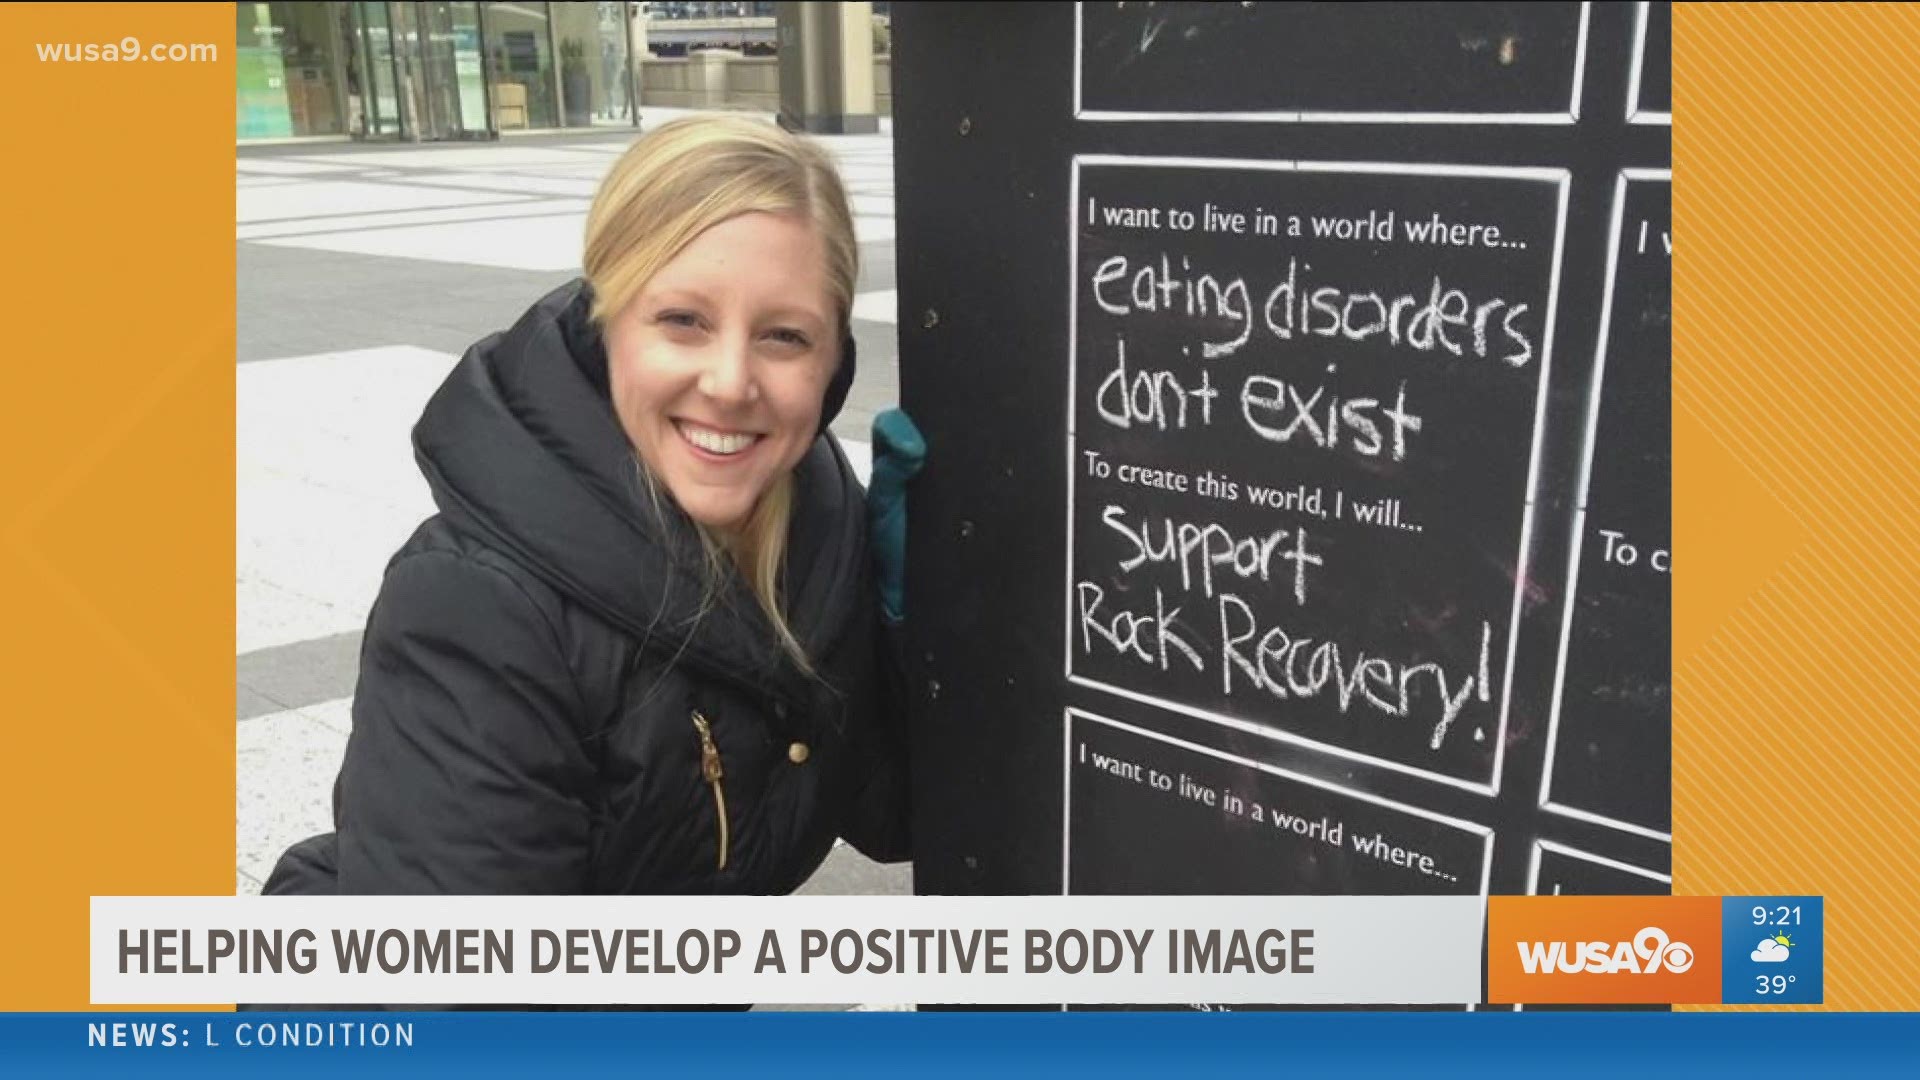 Christie Dondero Bettwy, Executive Director of Rock Recovery shares tips on how women can develop a positive body image.